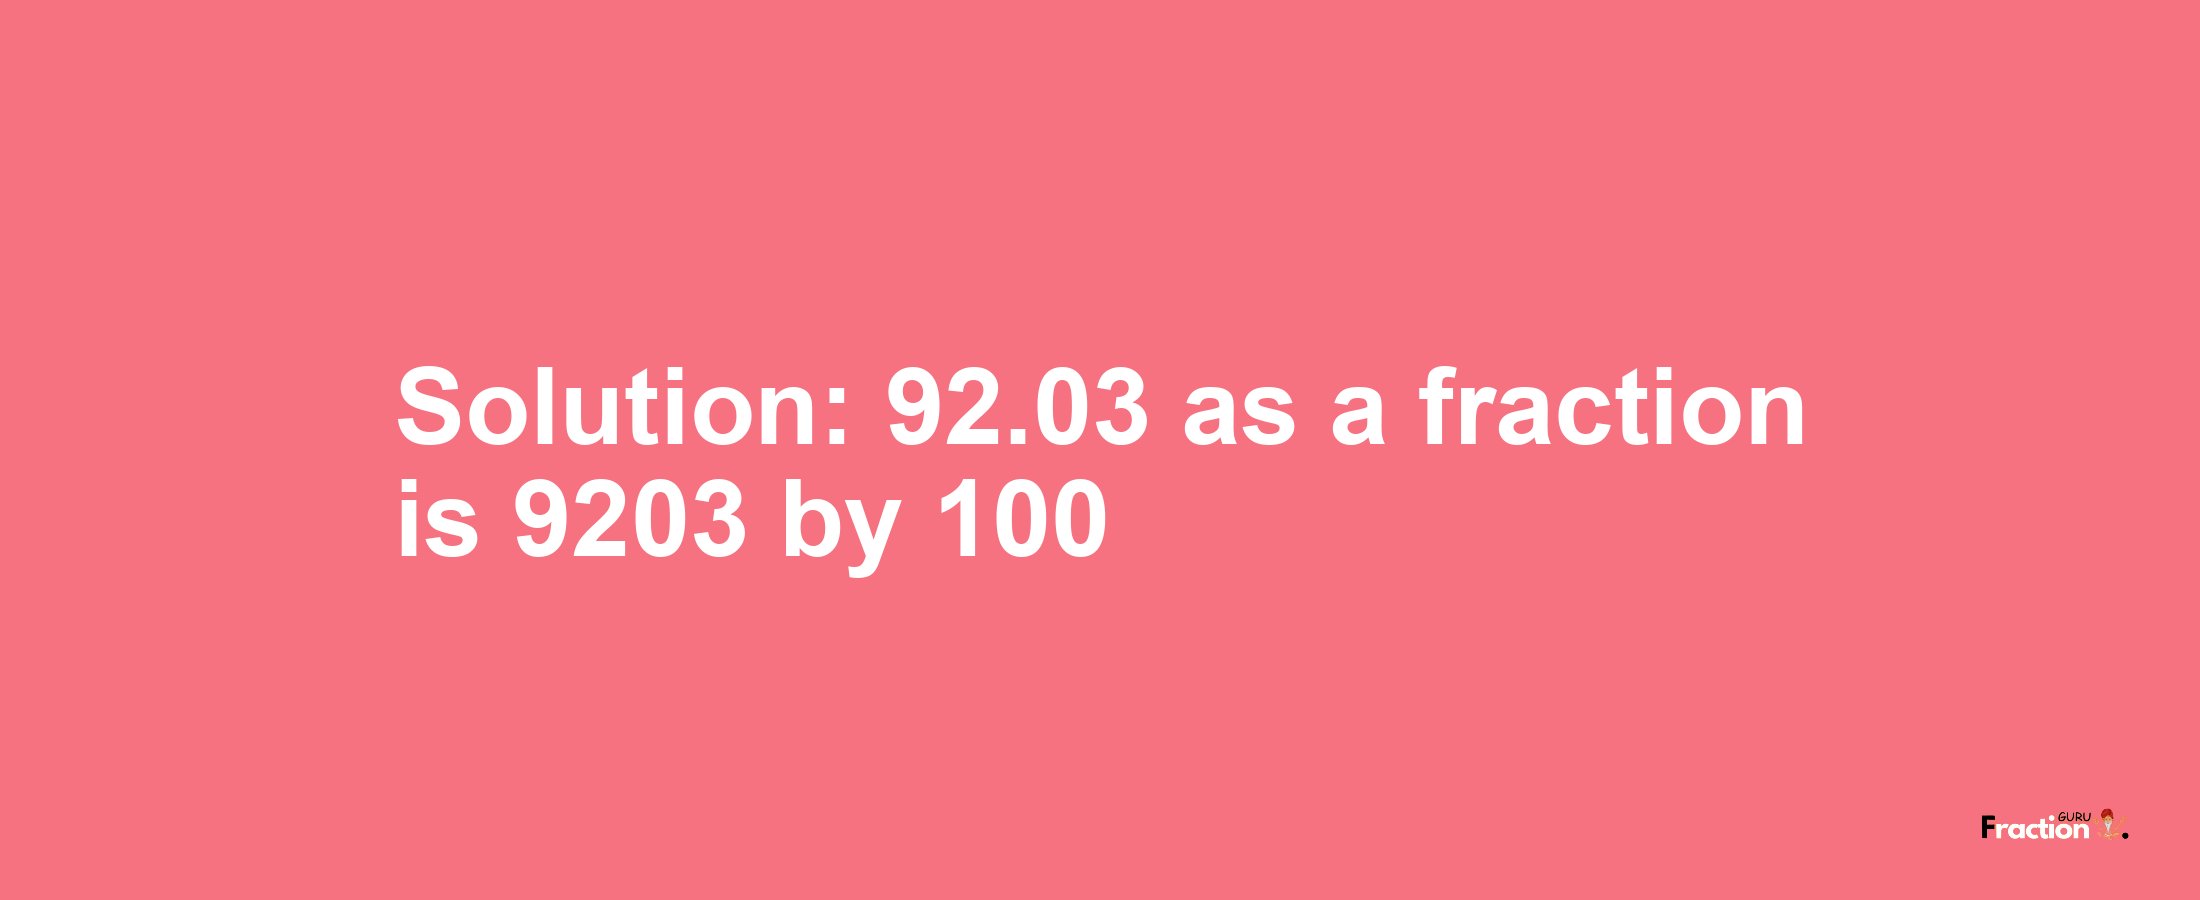 Solution:92.03 as a fraction is 9203/100